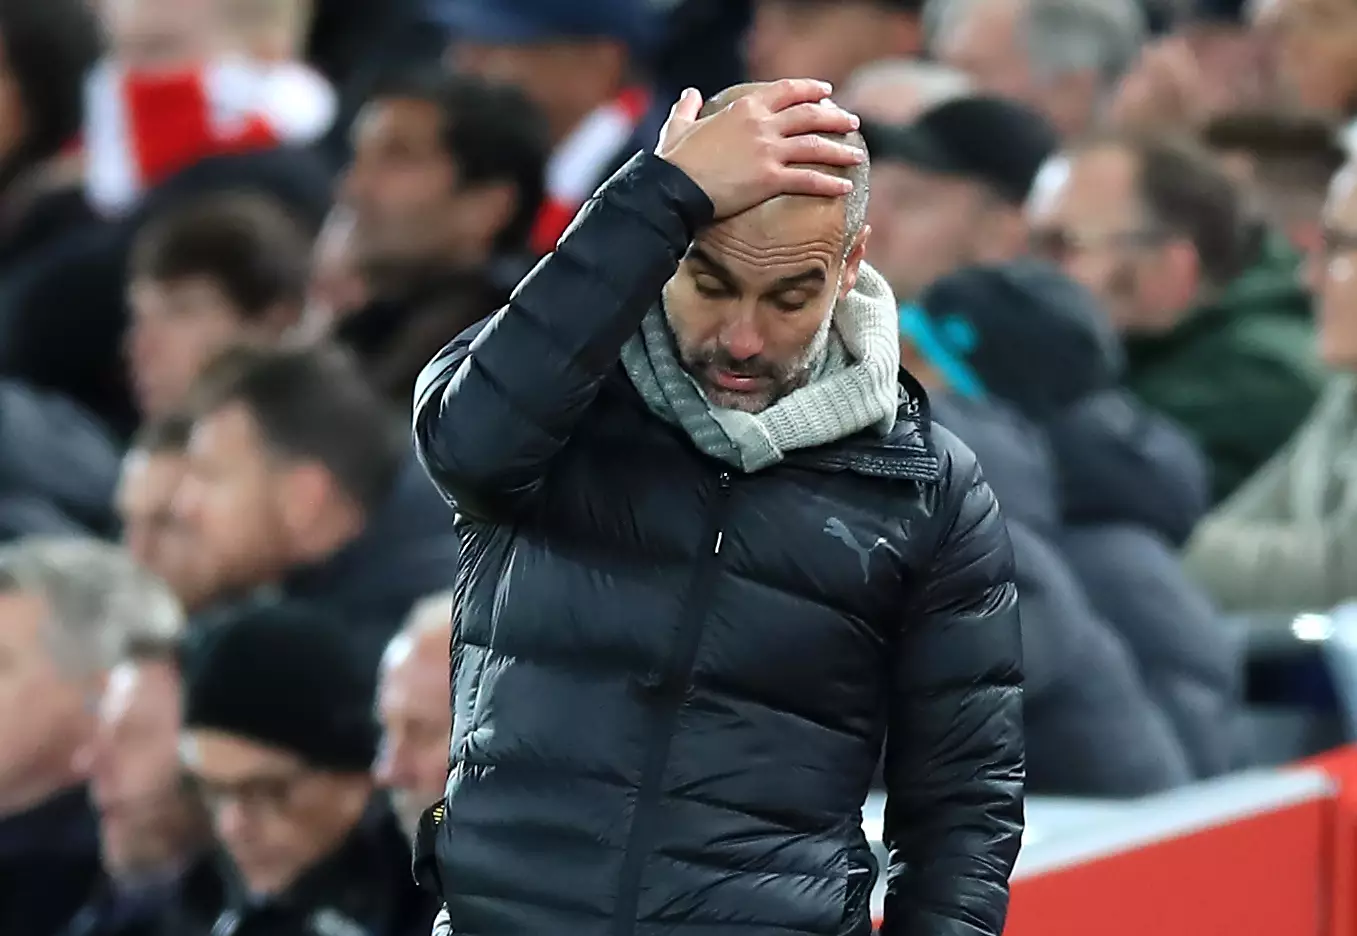 Guardiola wasn't happy during or after yesterday's game. Image: PA Images